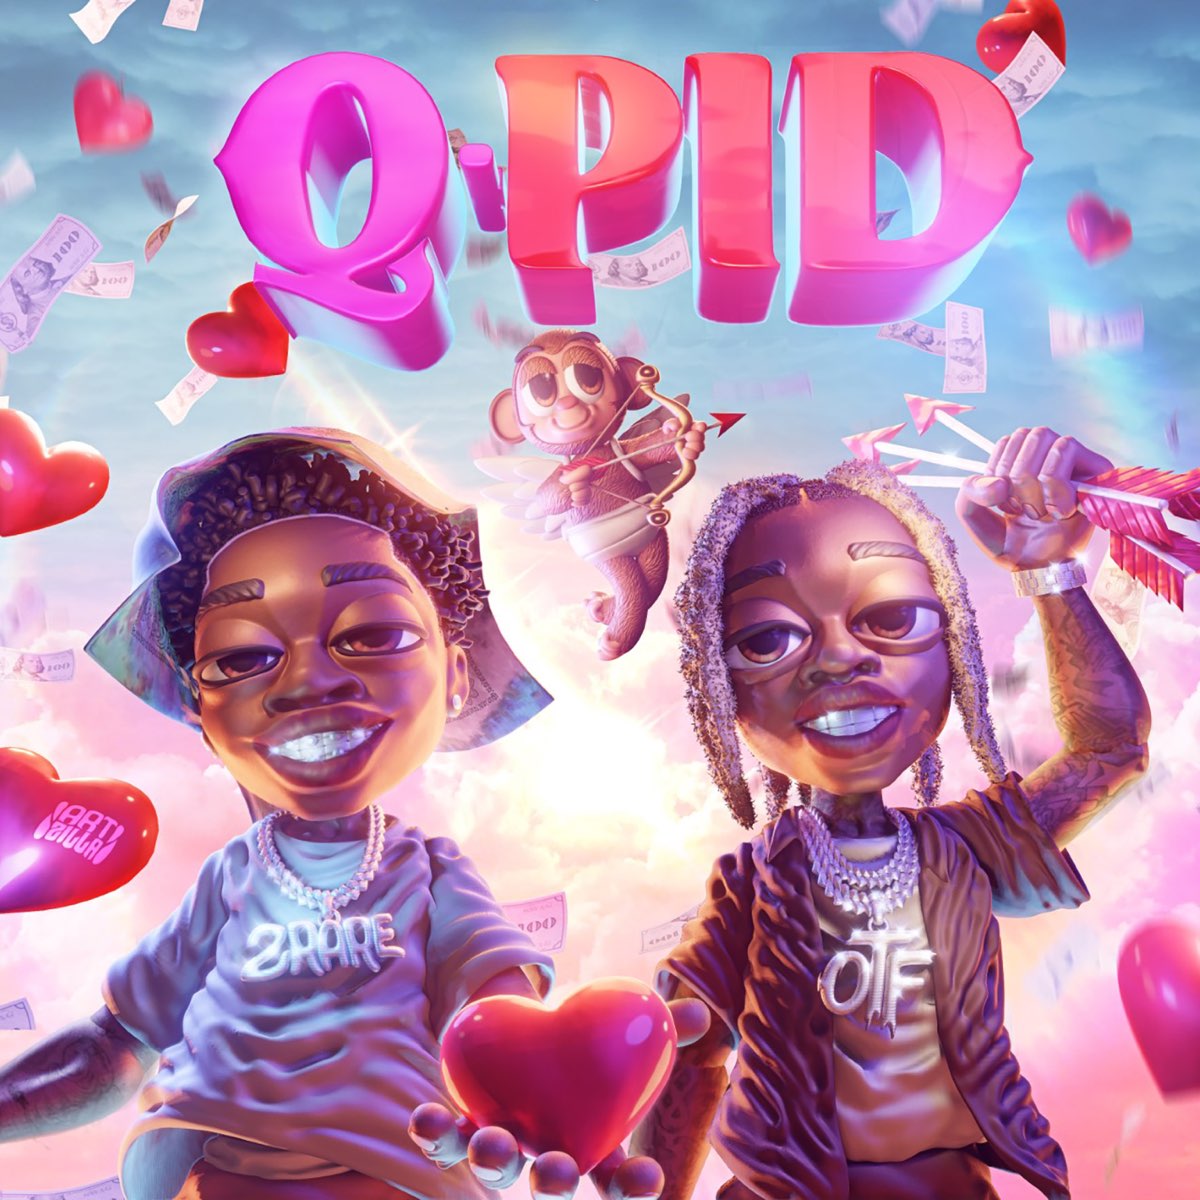 Q-Pid (Sped Up Version) - Single by 2rare & Lil Durk on Apple Music.